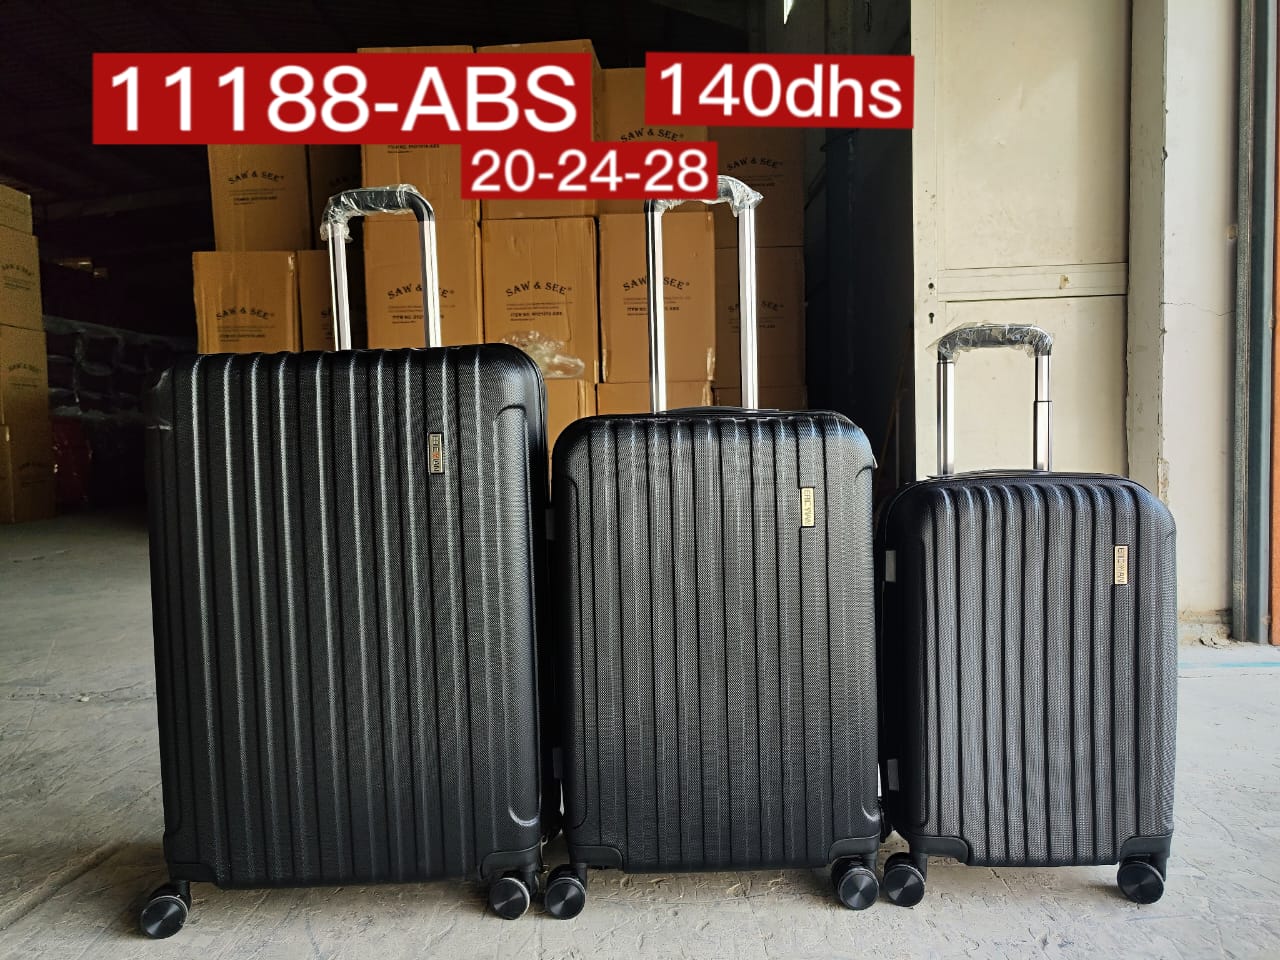 11188 ABS Luggage Sets